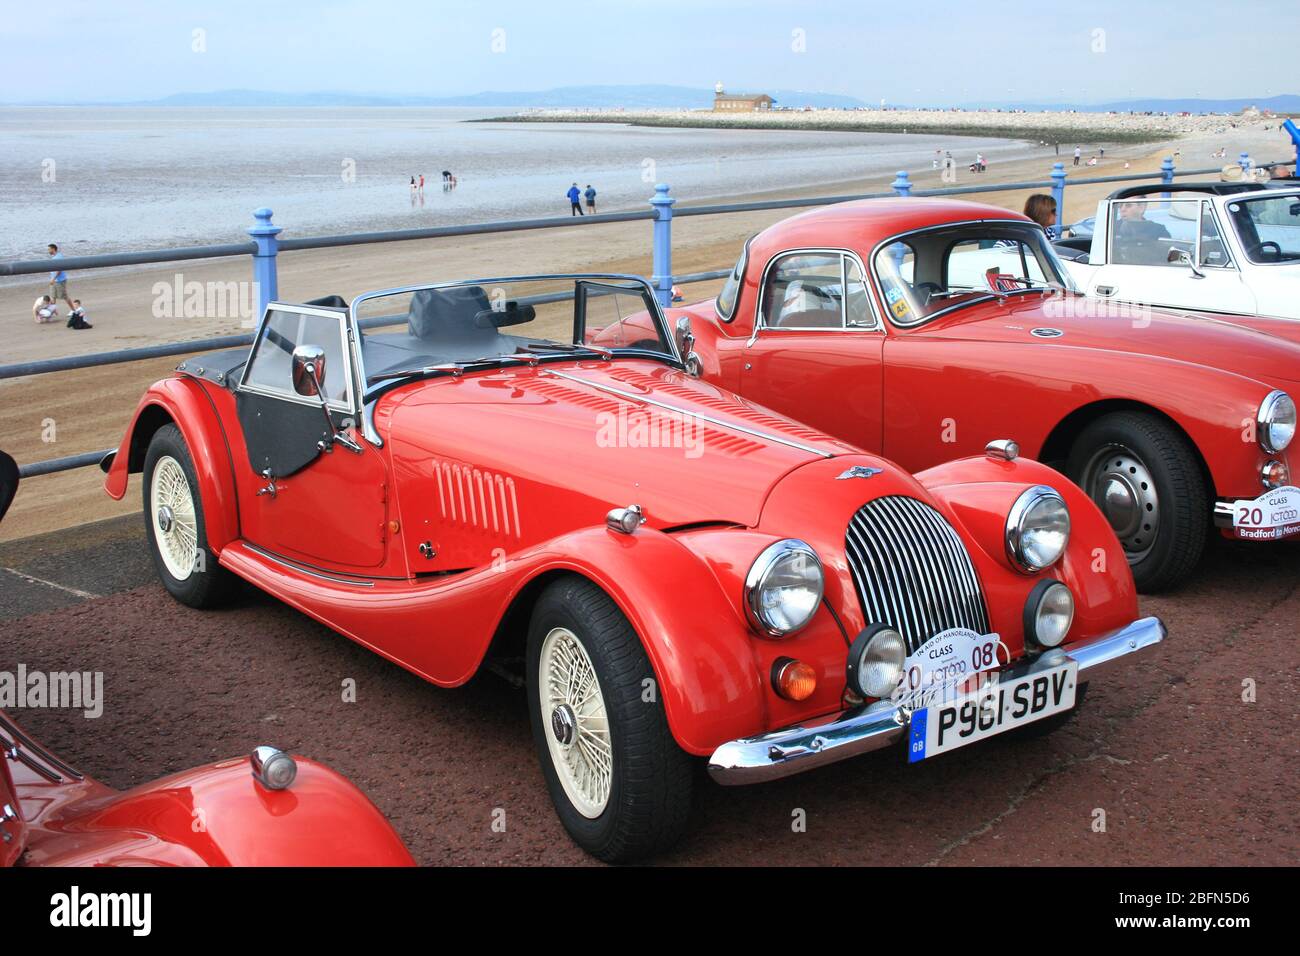 Morgan sports car on seafront at Morecambe after 2008 Bradford to Morecambe rally Stock Photo